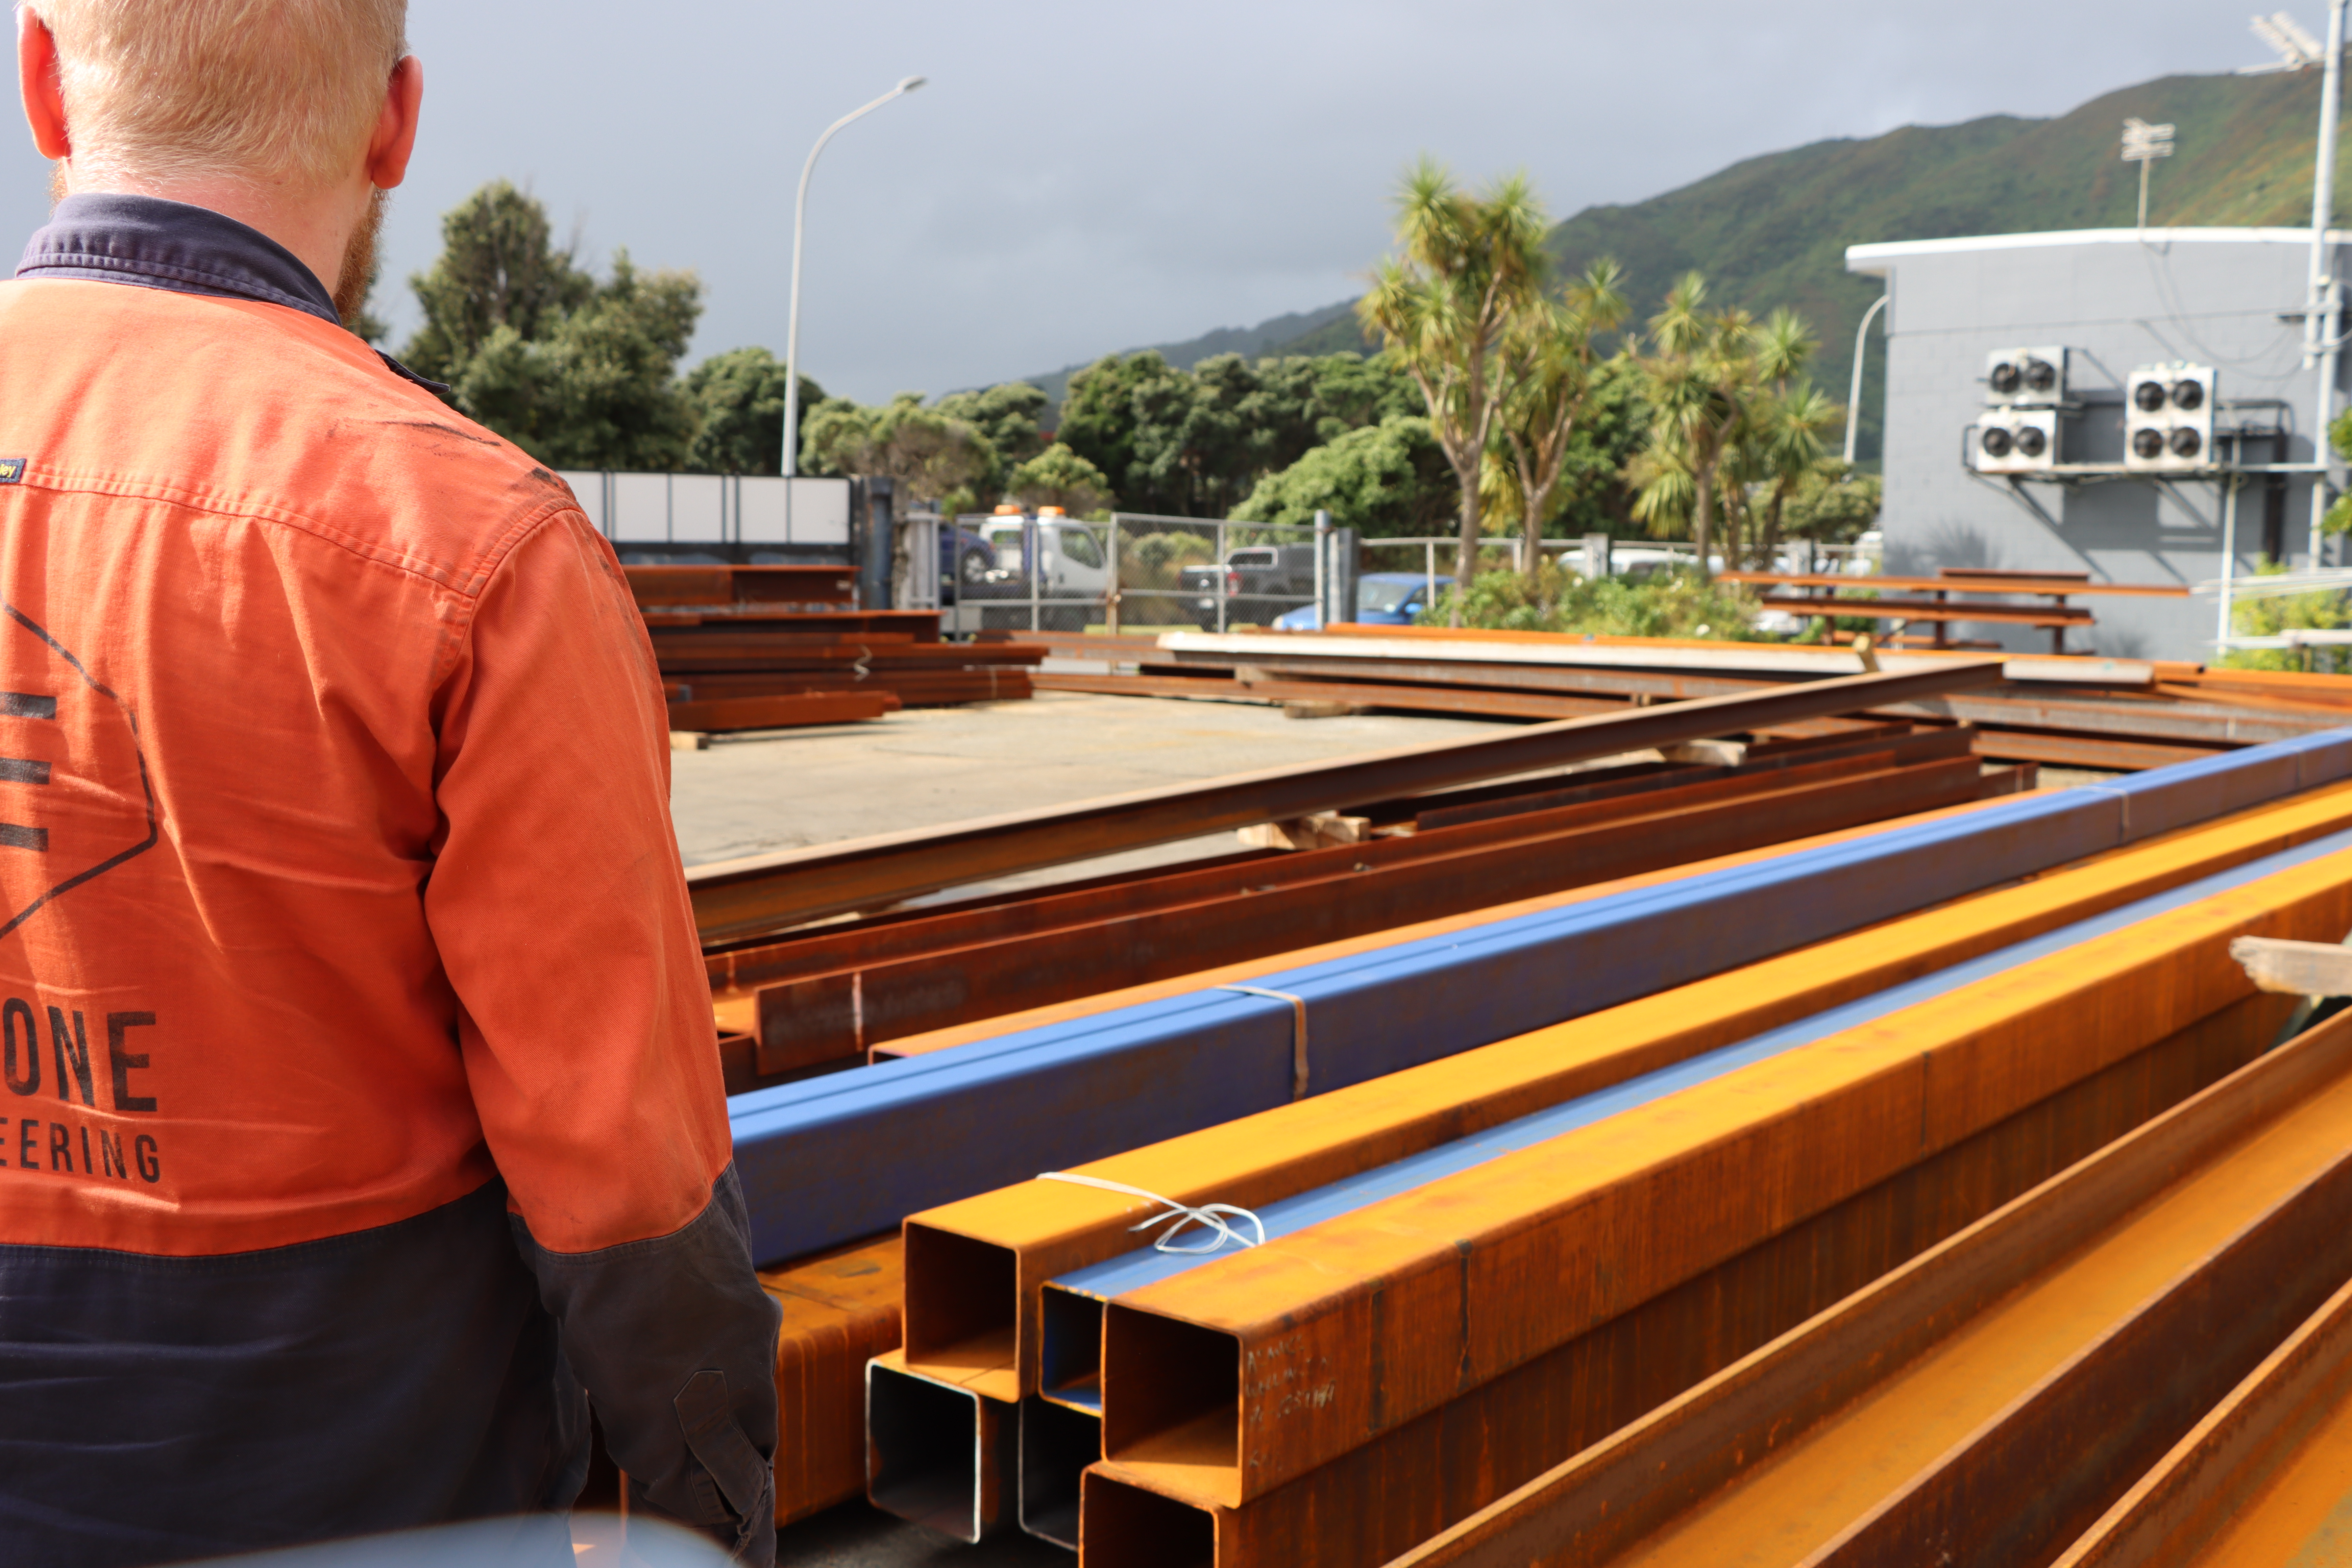 Kieran Houssenloge, a pakeha male wearing a high-vis vest, is standing next to stacked raw steel for the build in the yard.